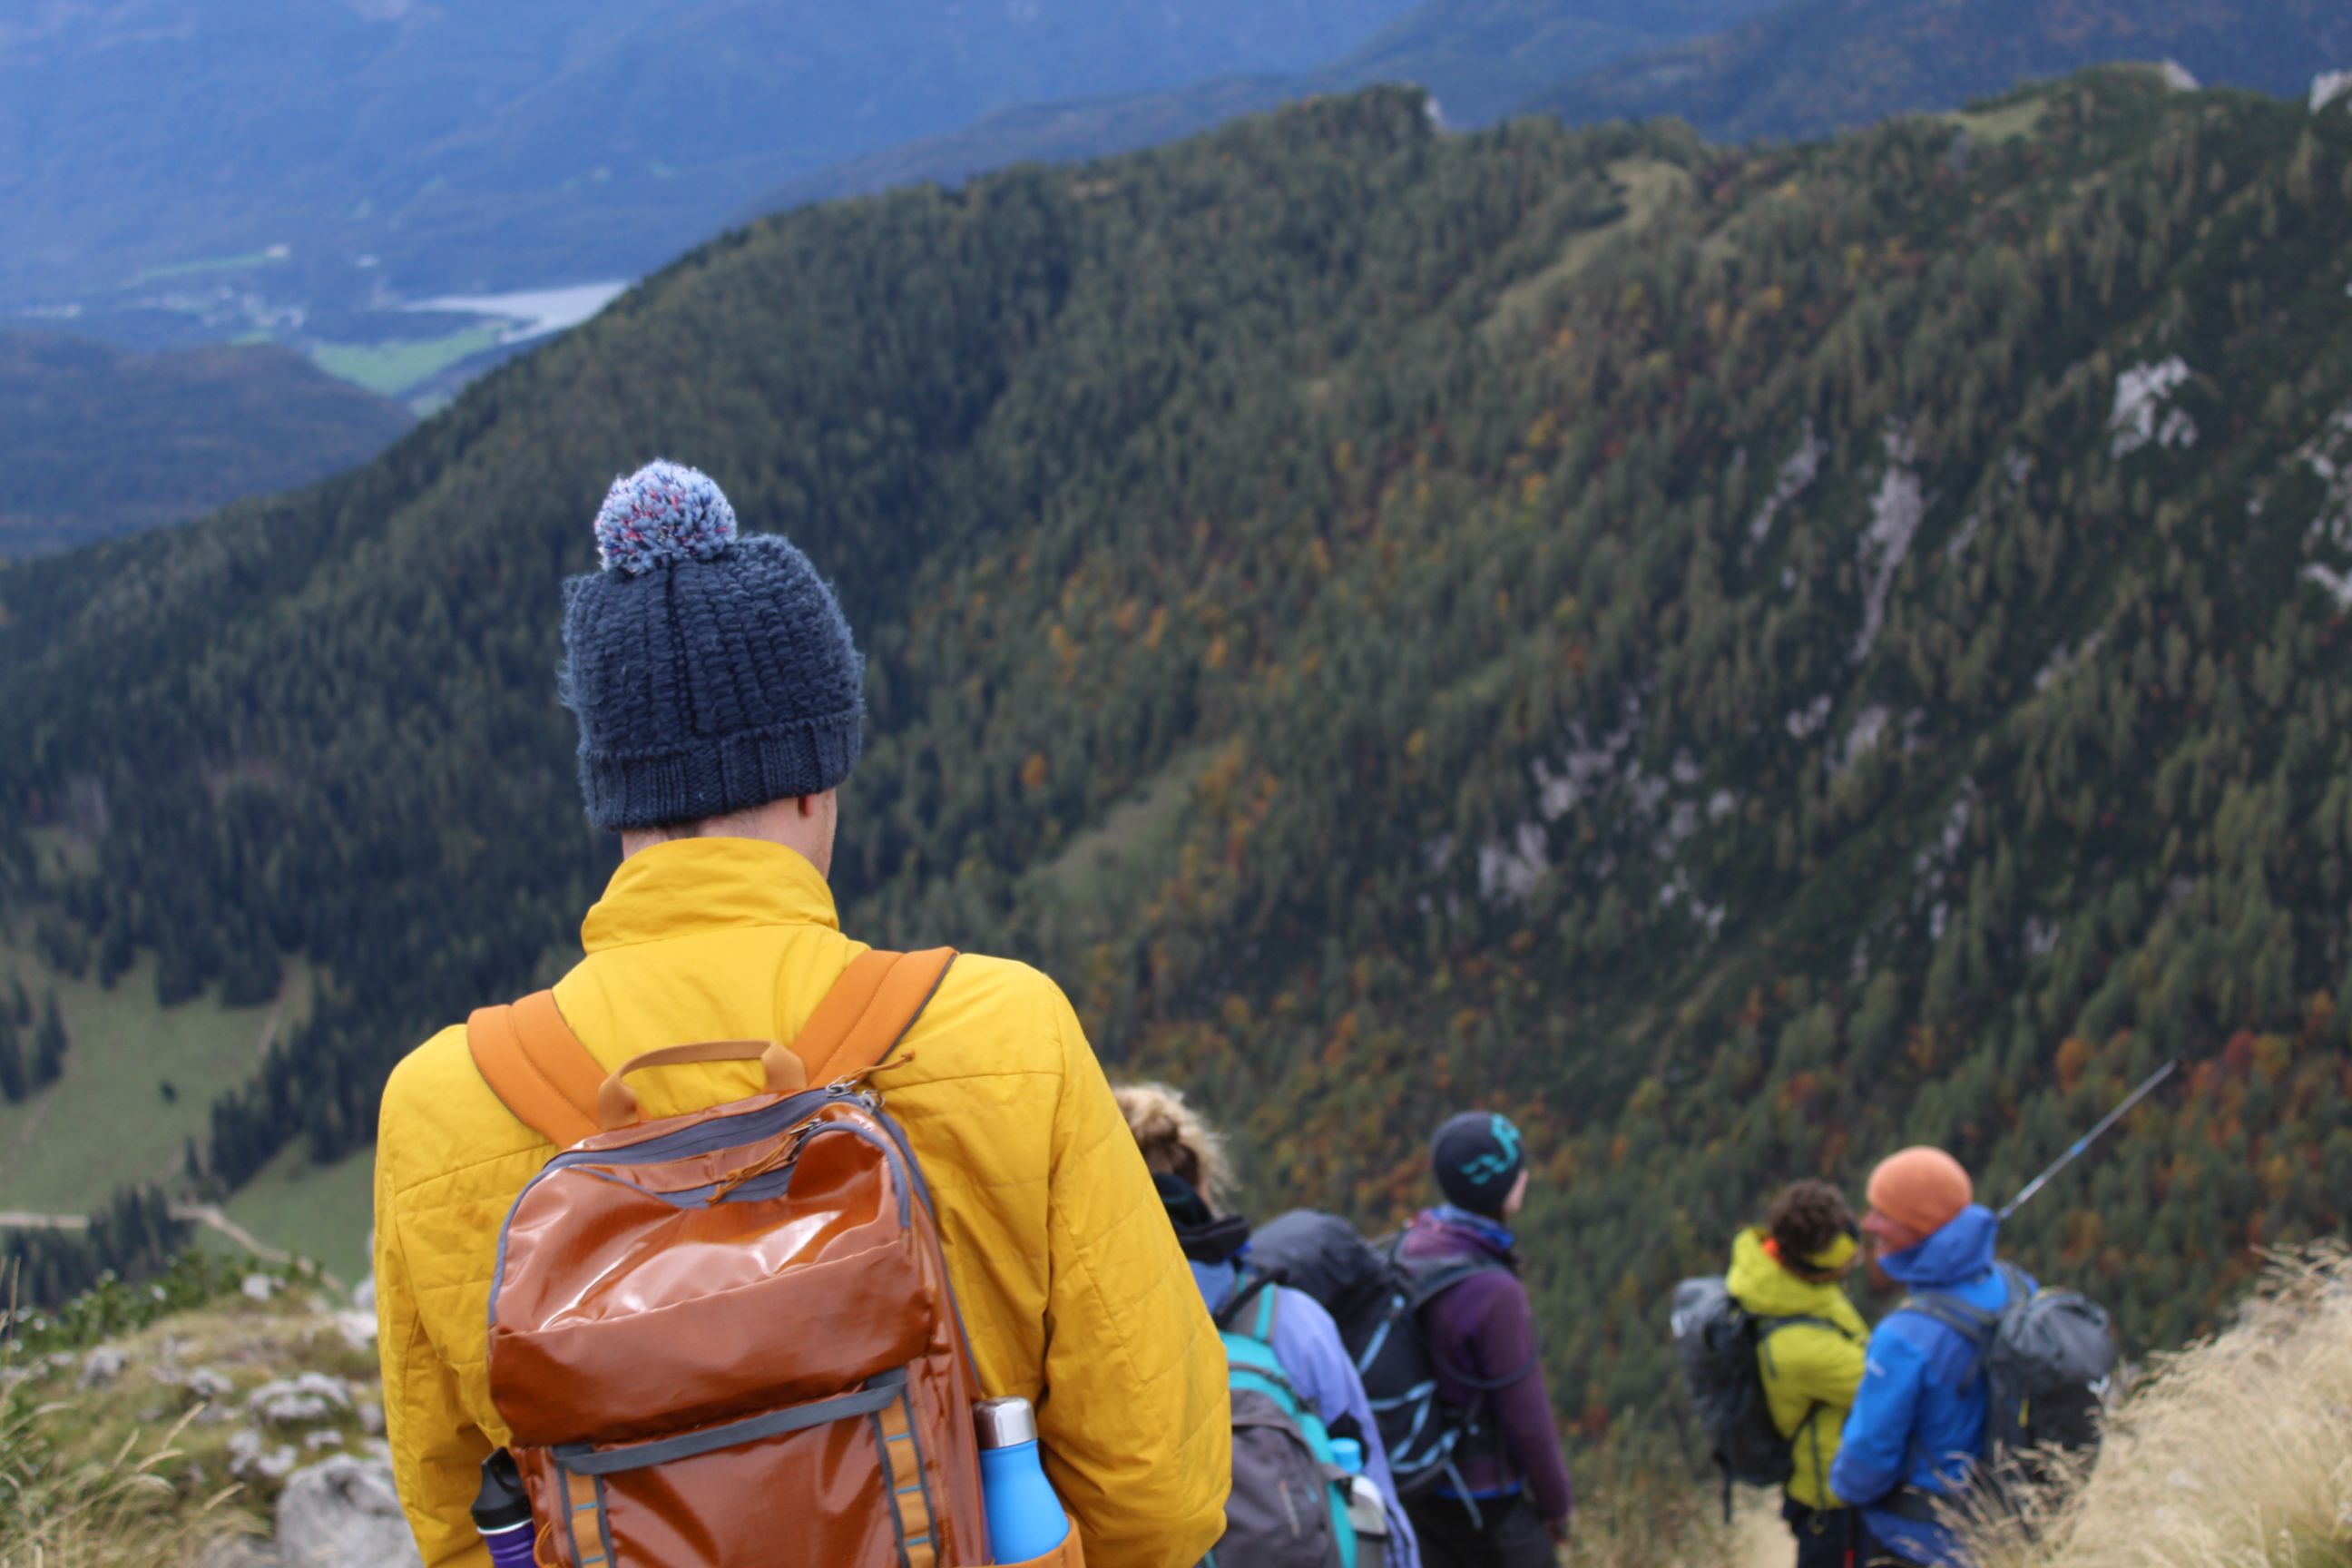 Hikers descend from Mount Viševnik, a sliver of Lake Bohinj visible in the background.